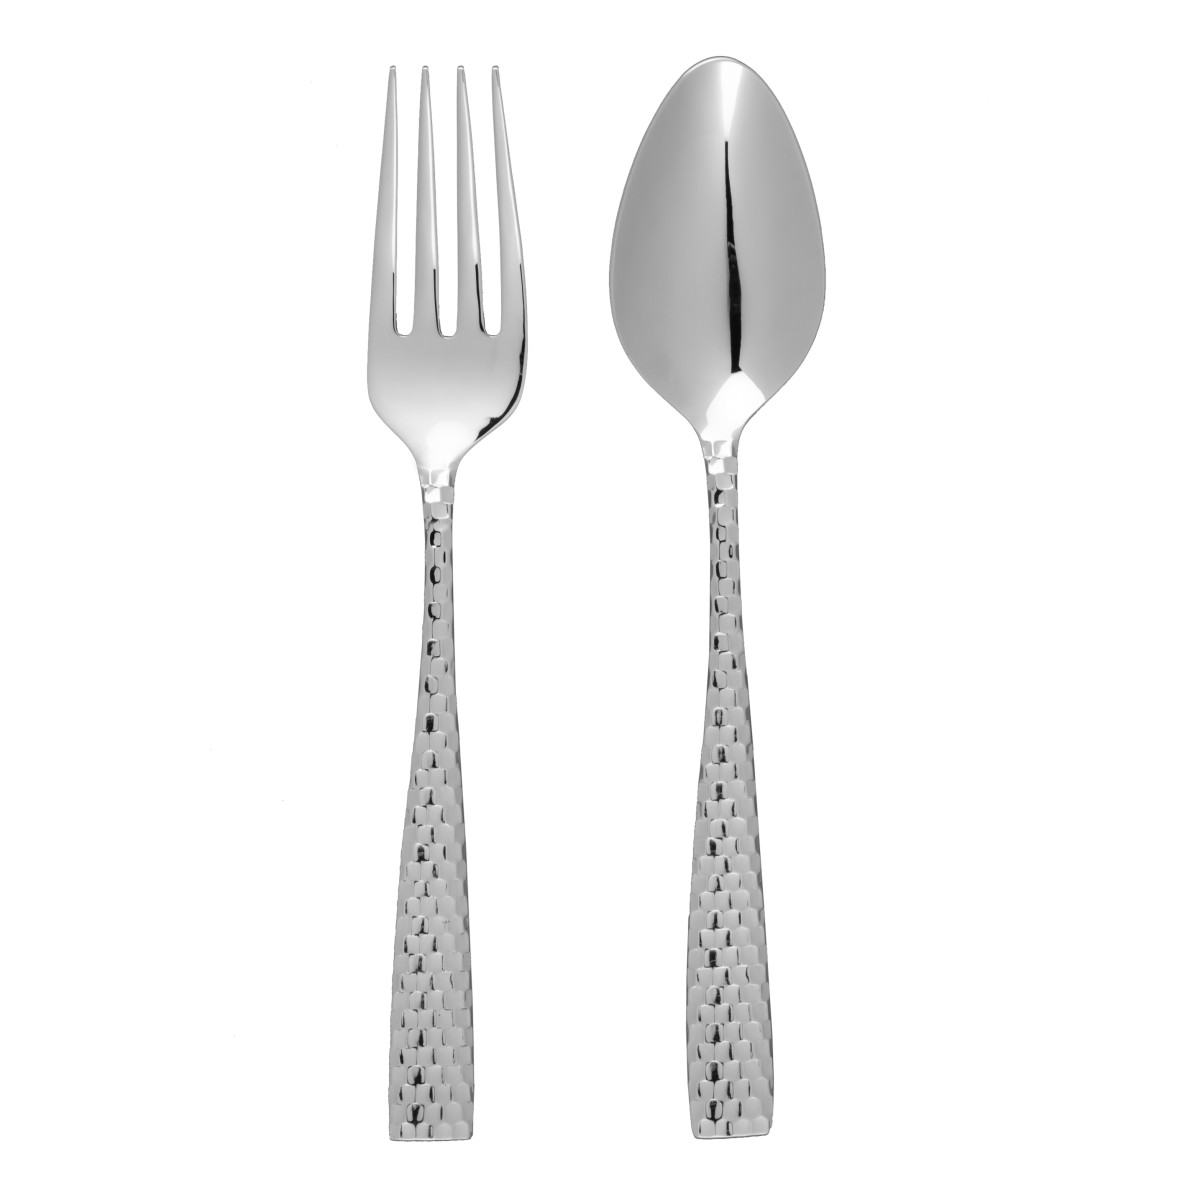 Lucca Faceted 2pc Serving Set